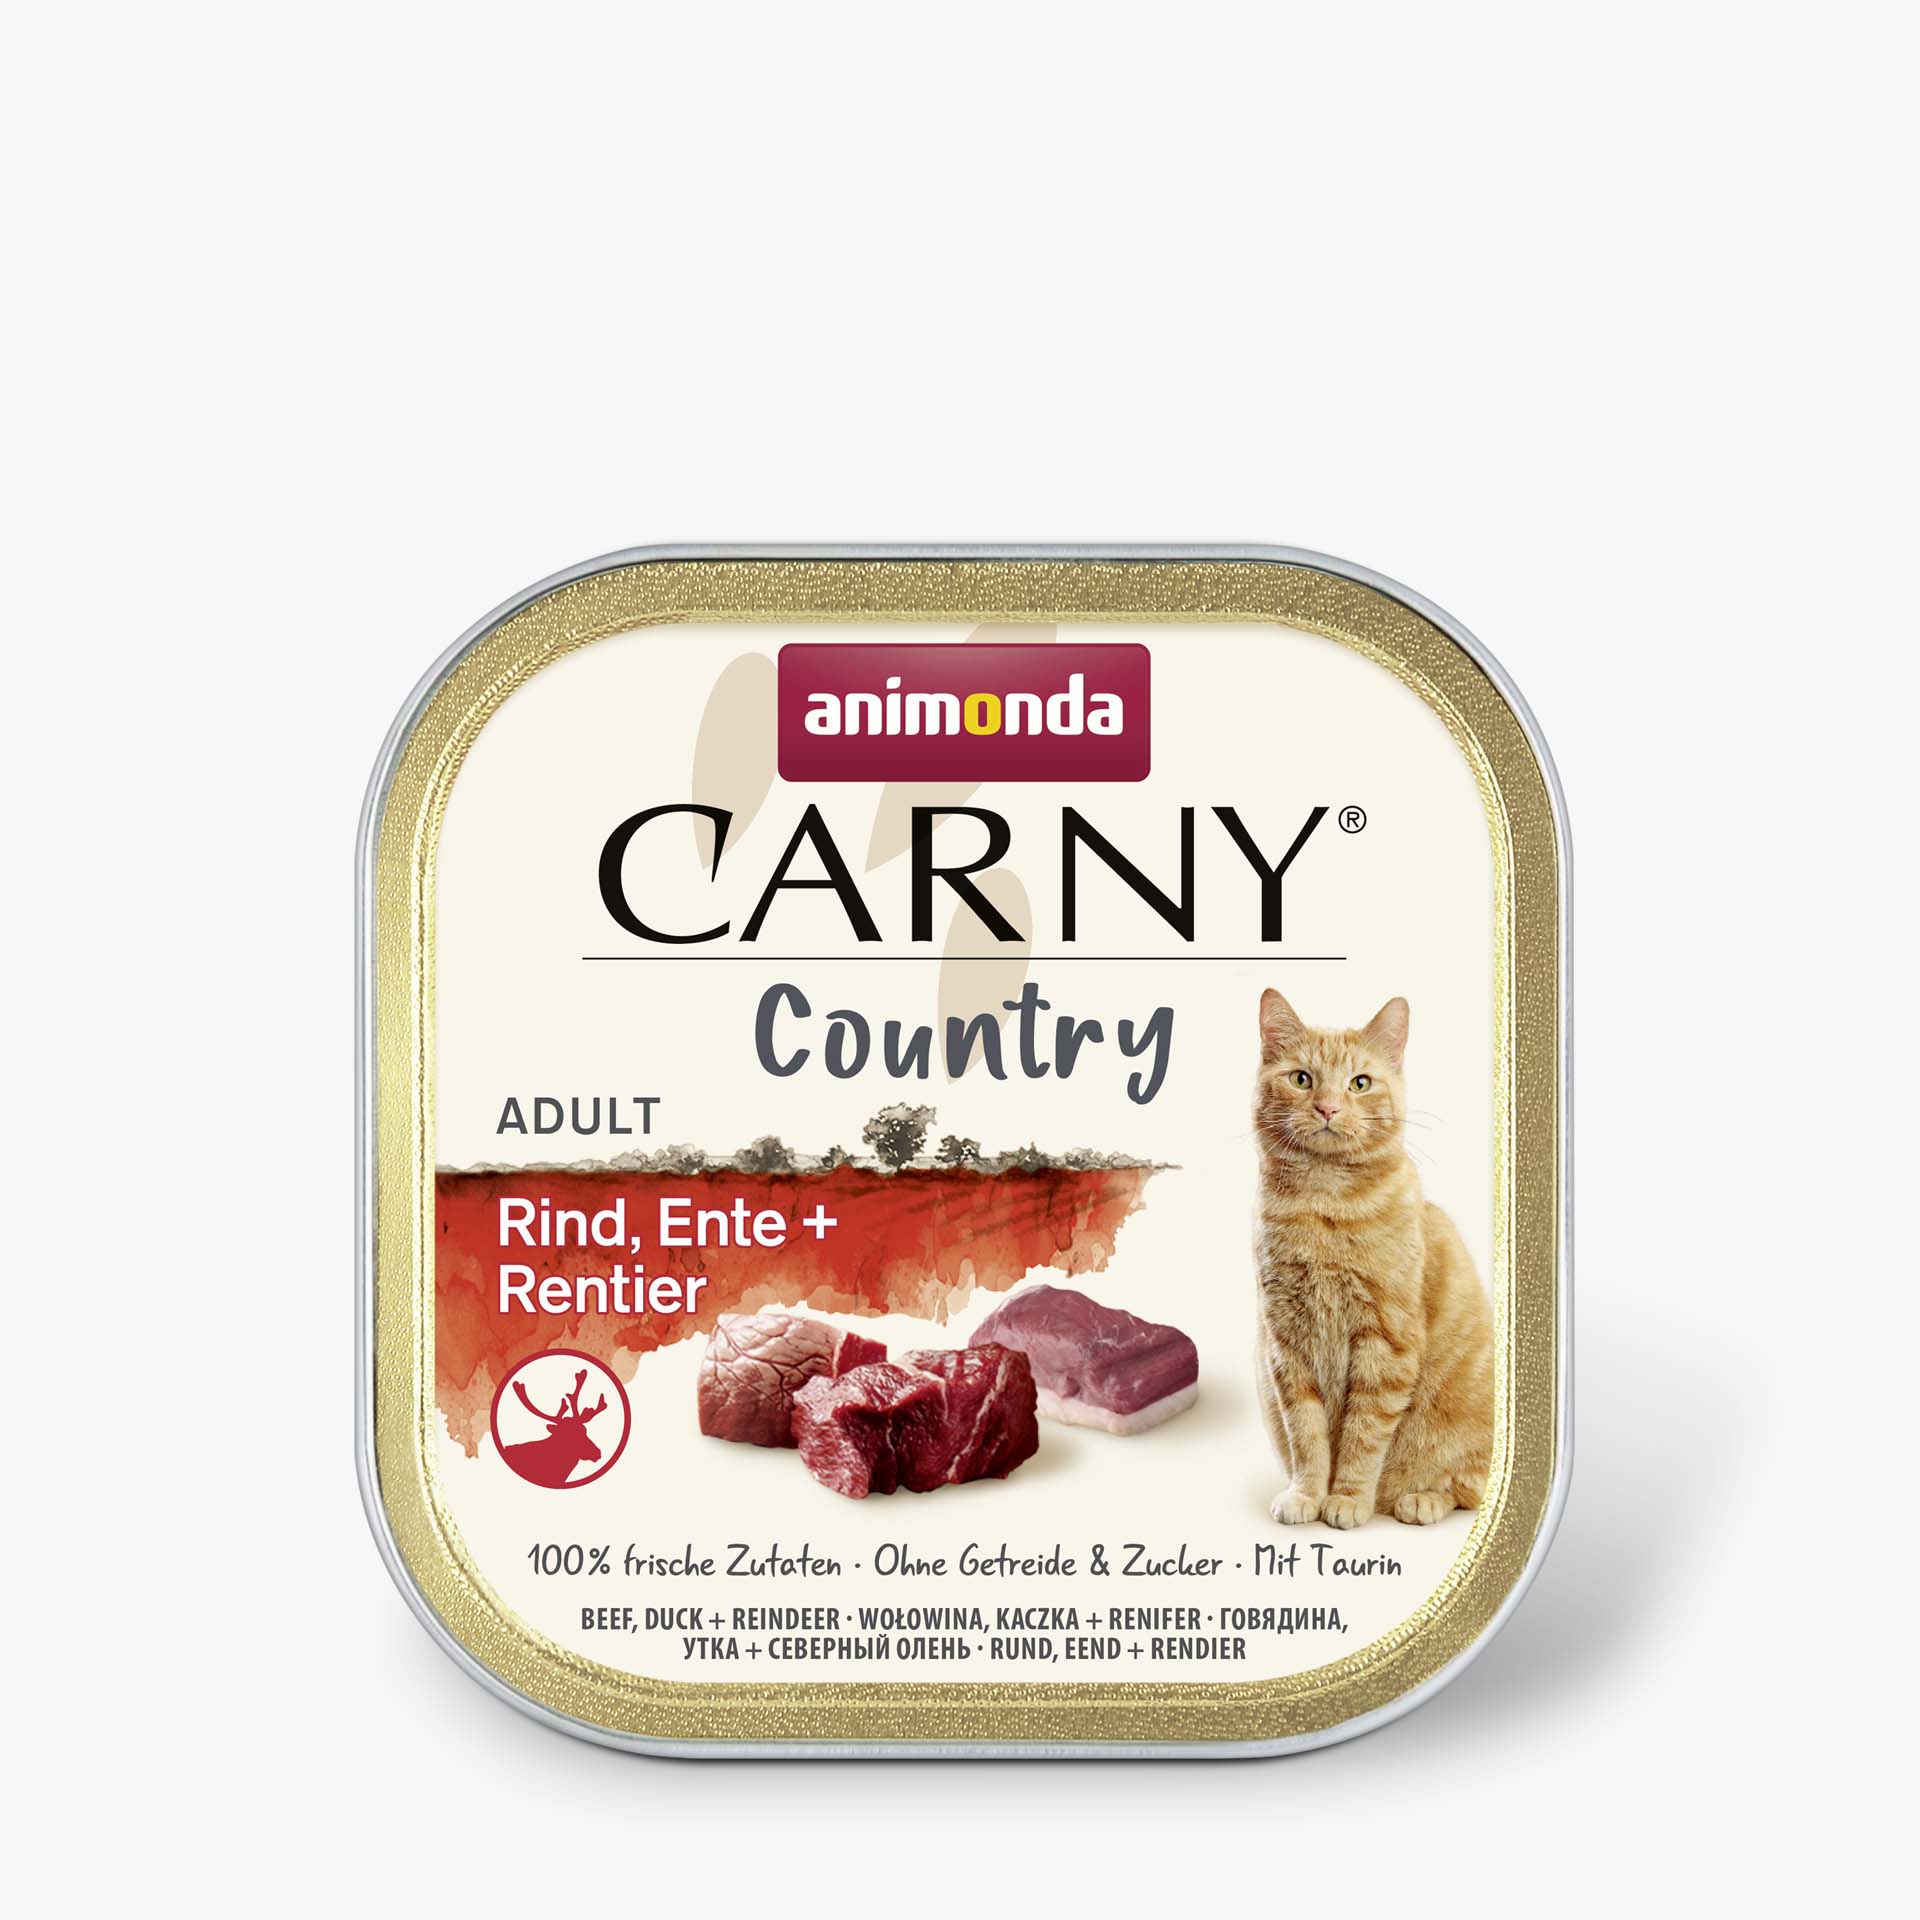 Carny Country Adult Rind, Ente + Rentier